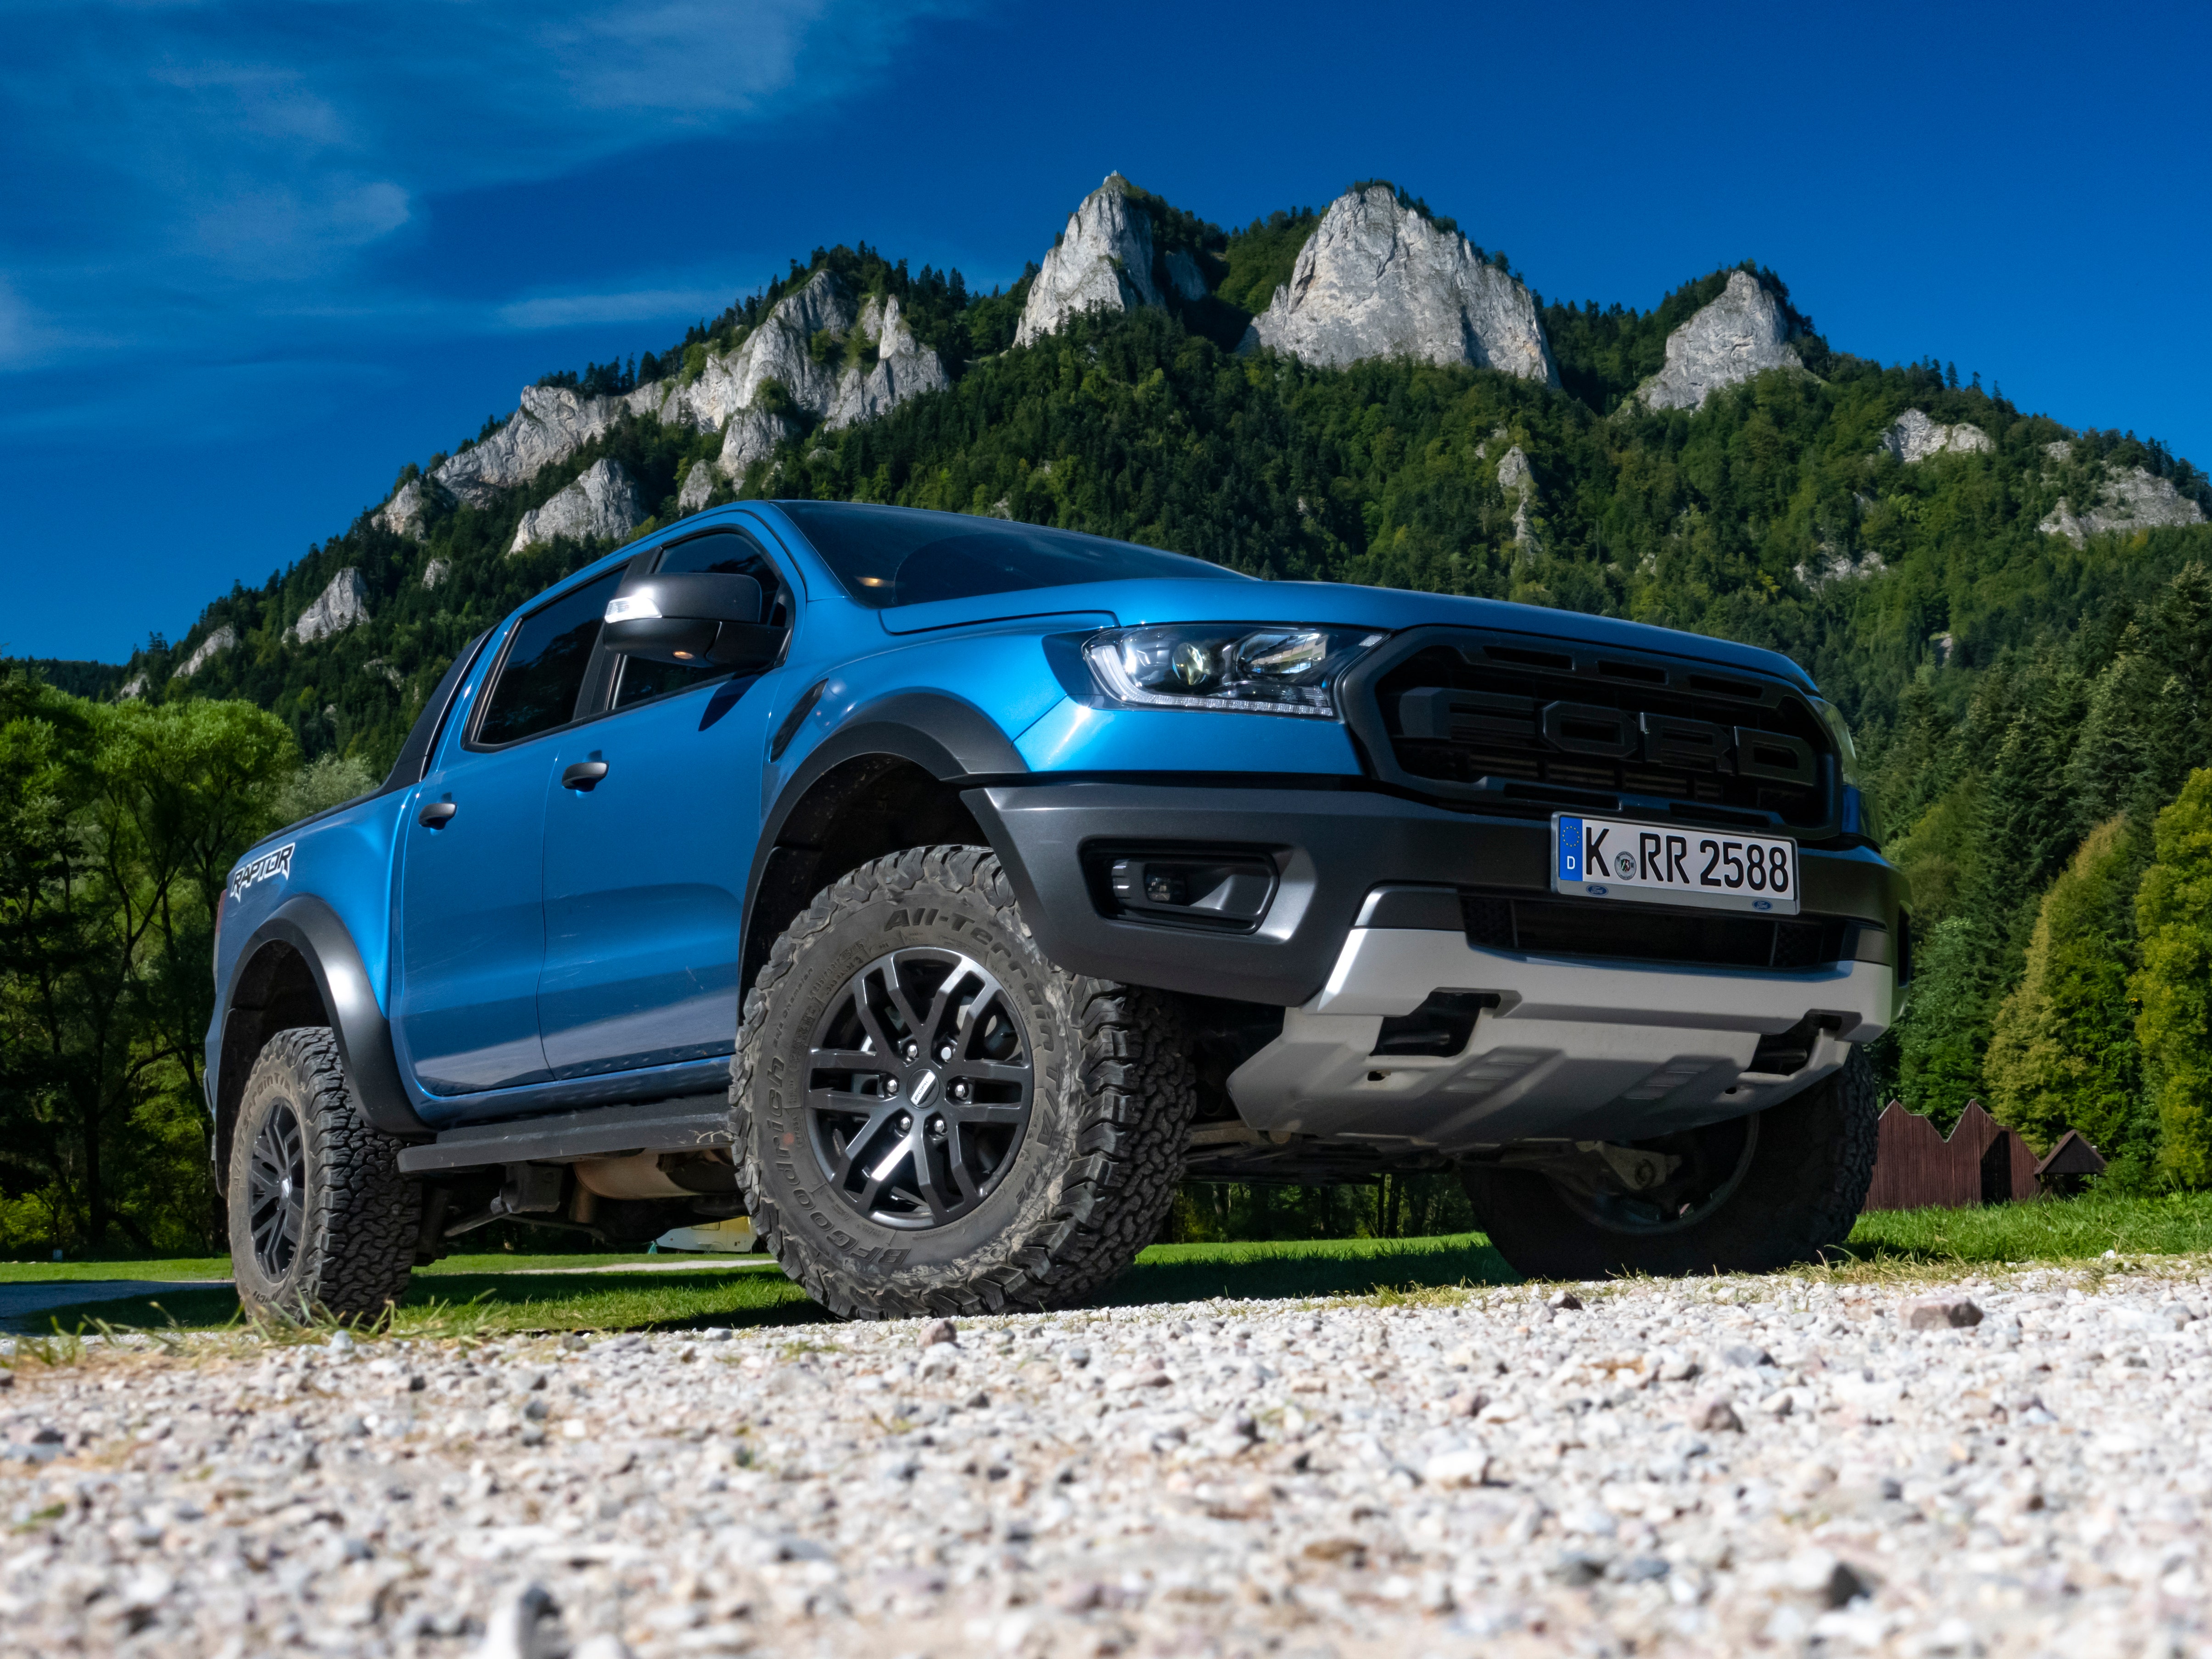 New Global Ford Ranger Pickup Previews The Next-Gen U.S. Model - Forbes  Wheels